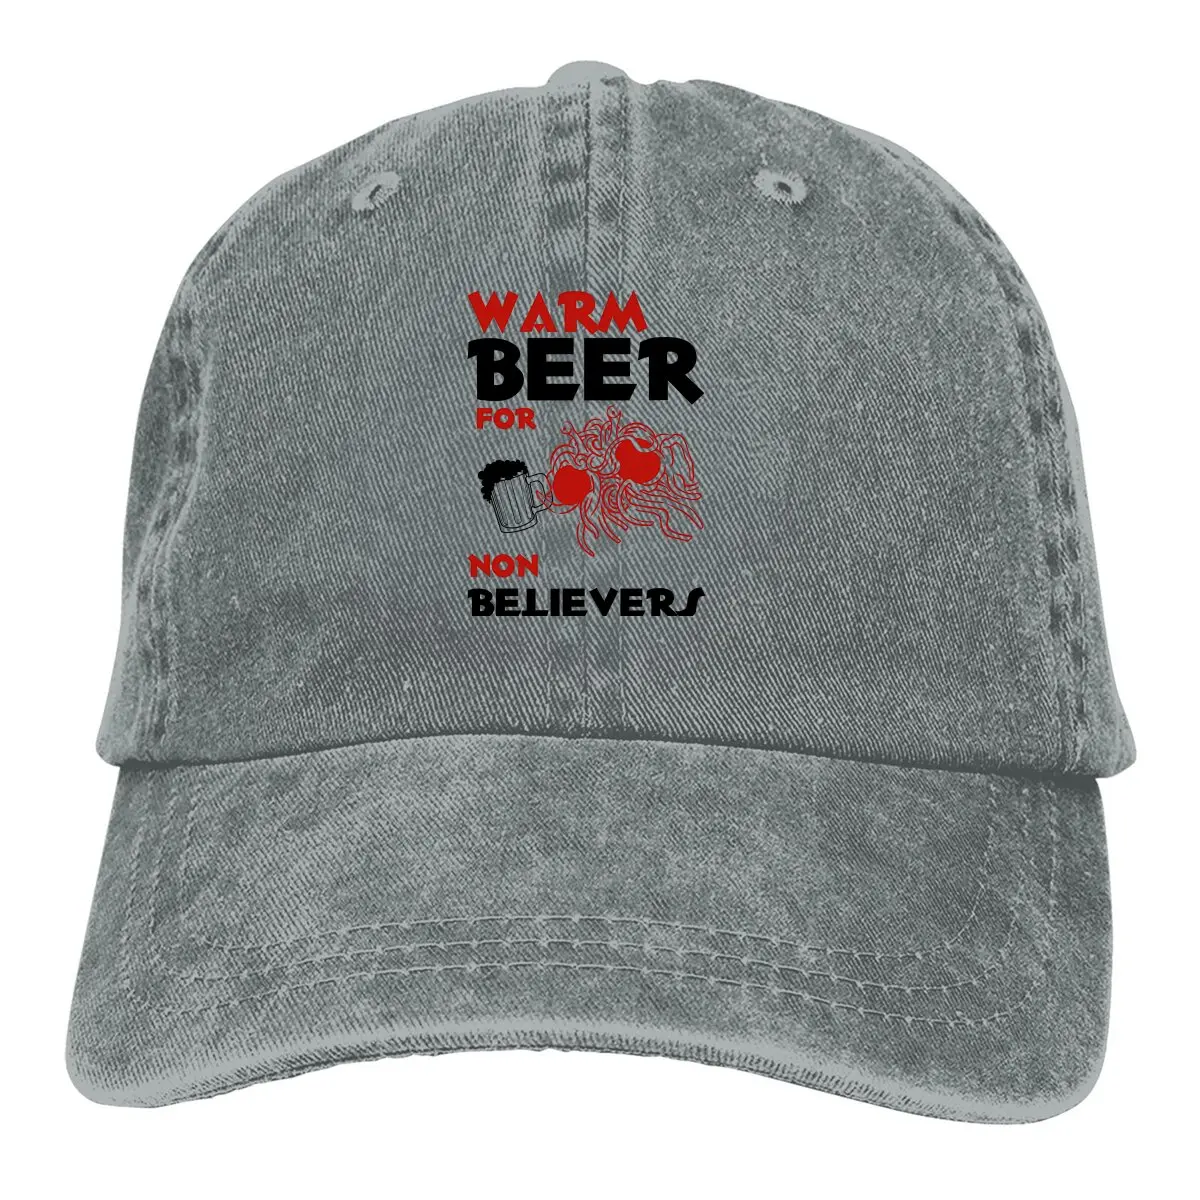 

Summer Cap Sun Visor Warm Beer For Non Believers Hip Hop Caps Flying Spaghetti Monster Cowboy Hat Peaked Trucker Dad Hats